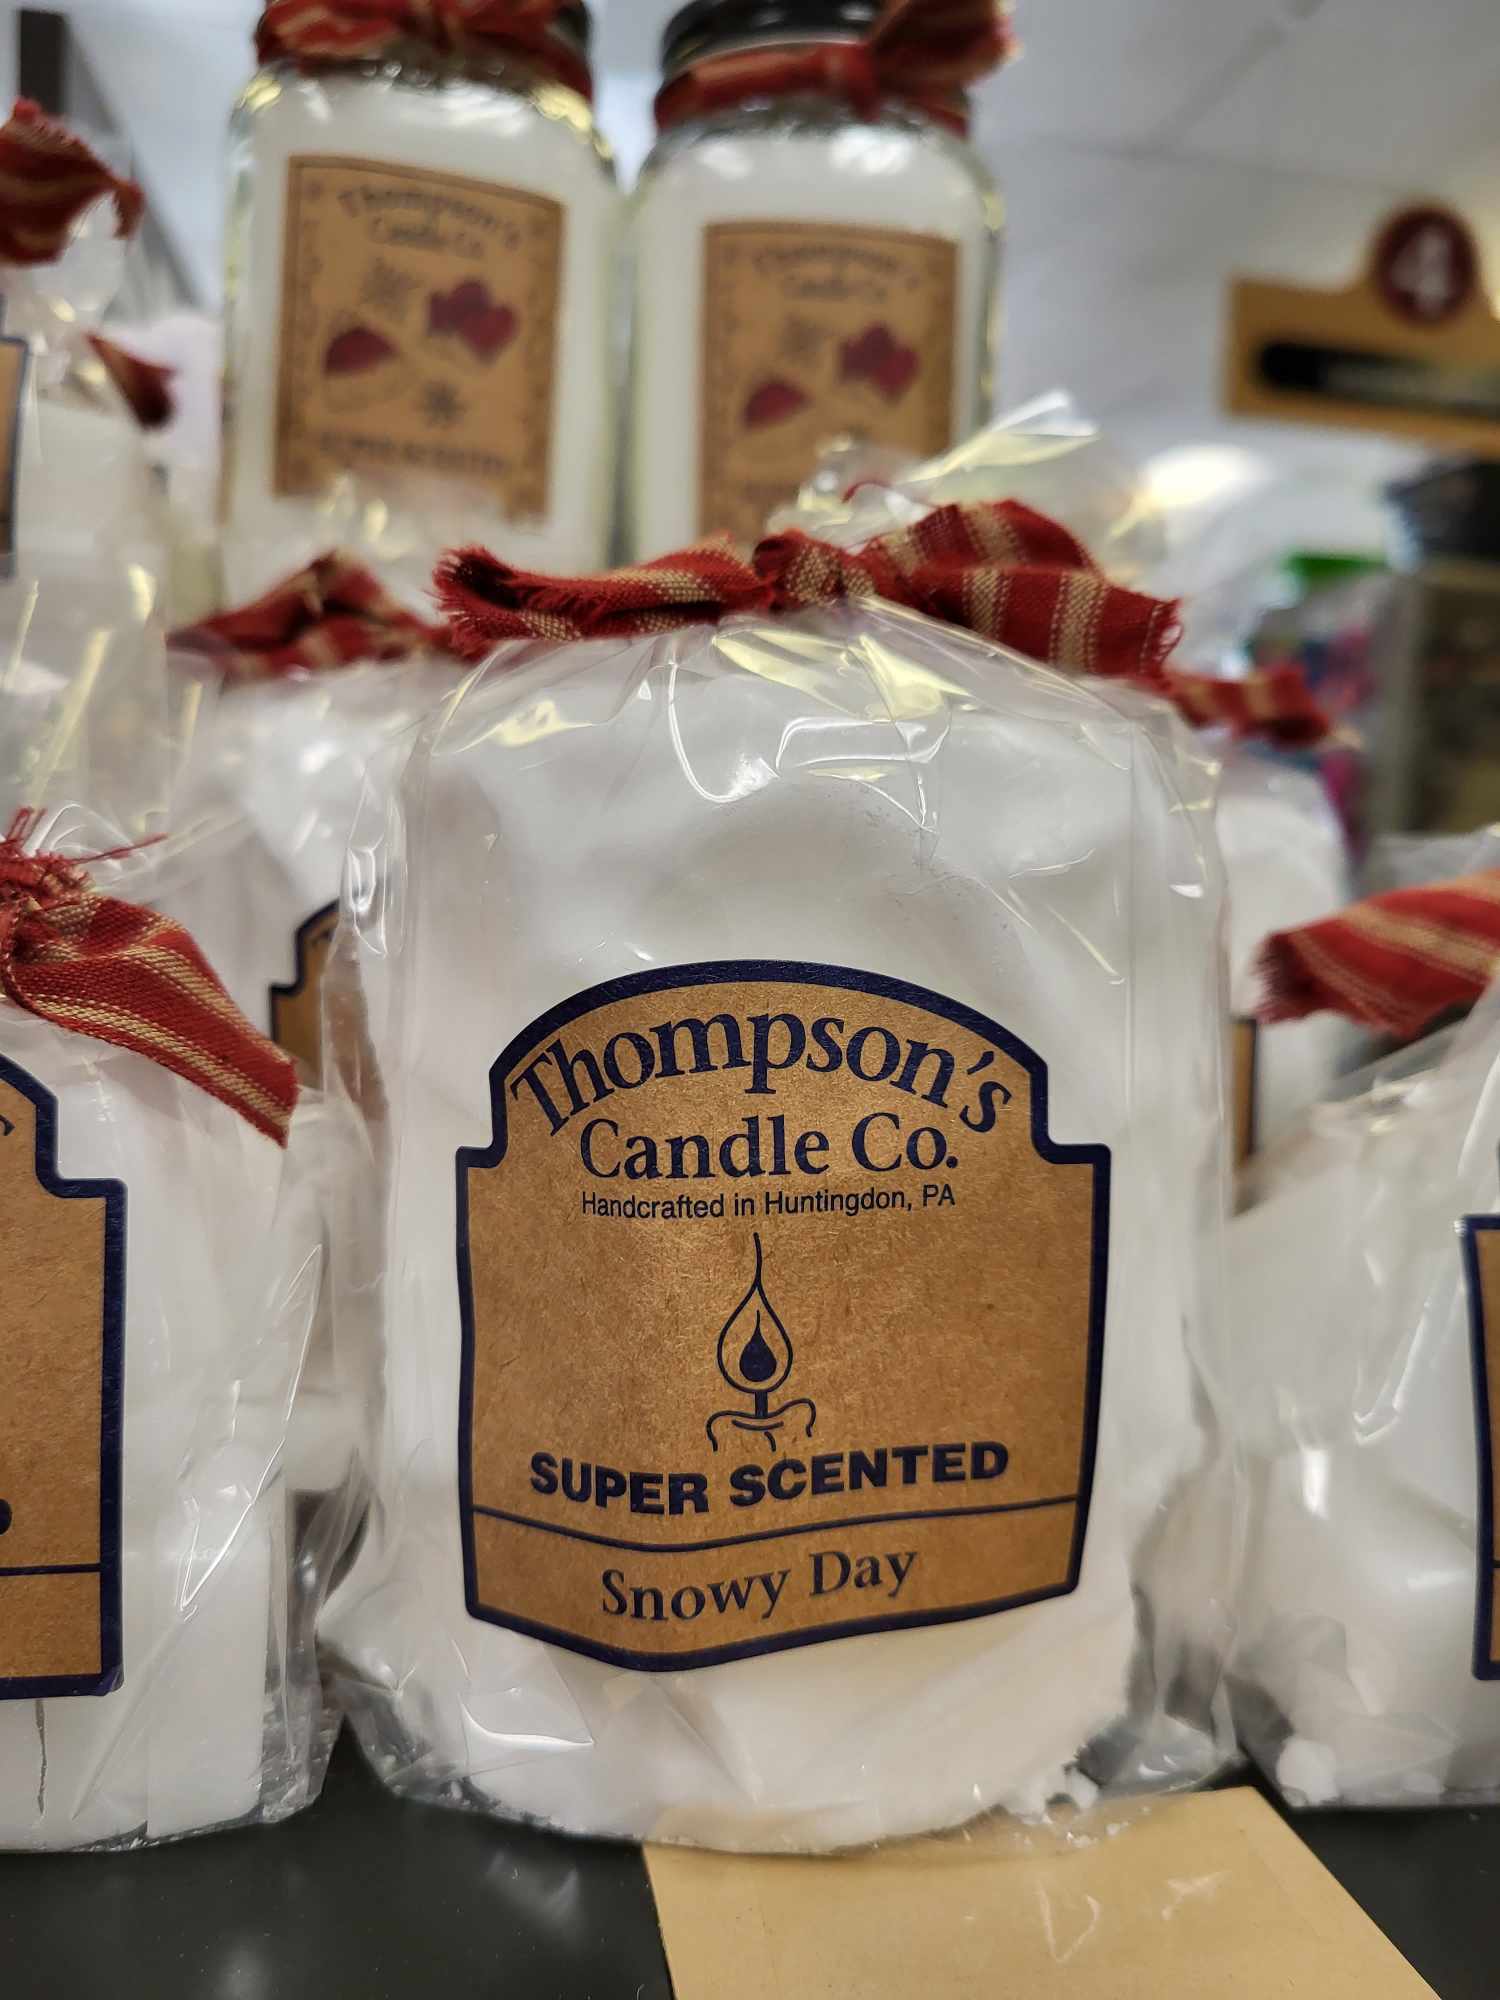 Thompson's Candle Co. Snowy Day Pillar